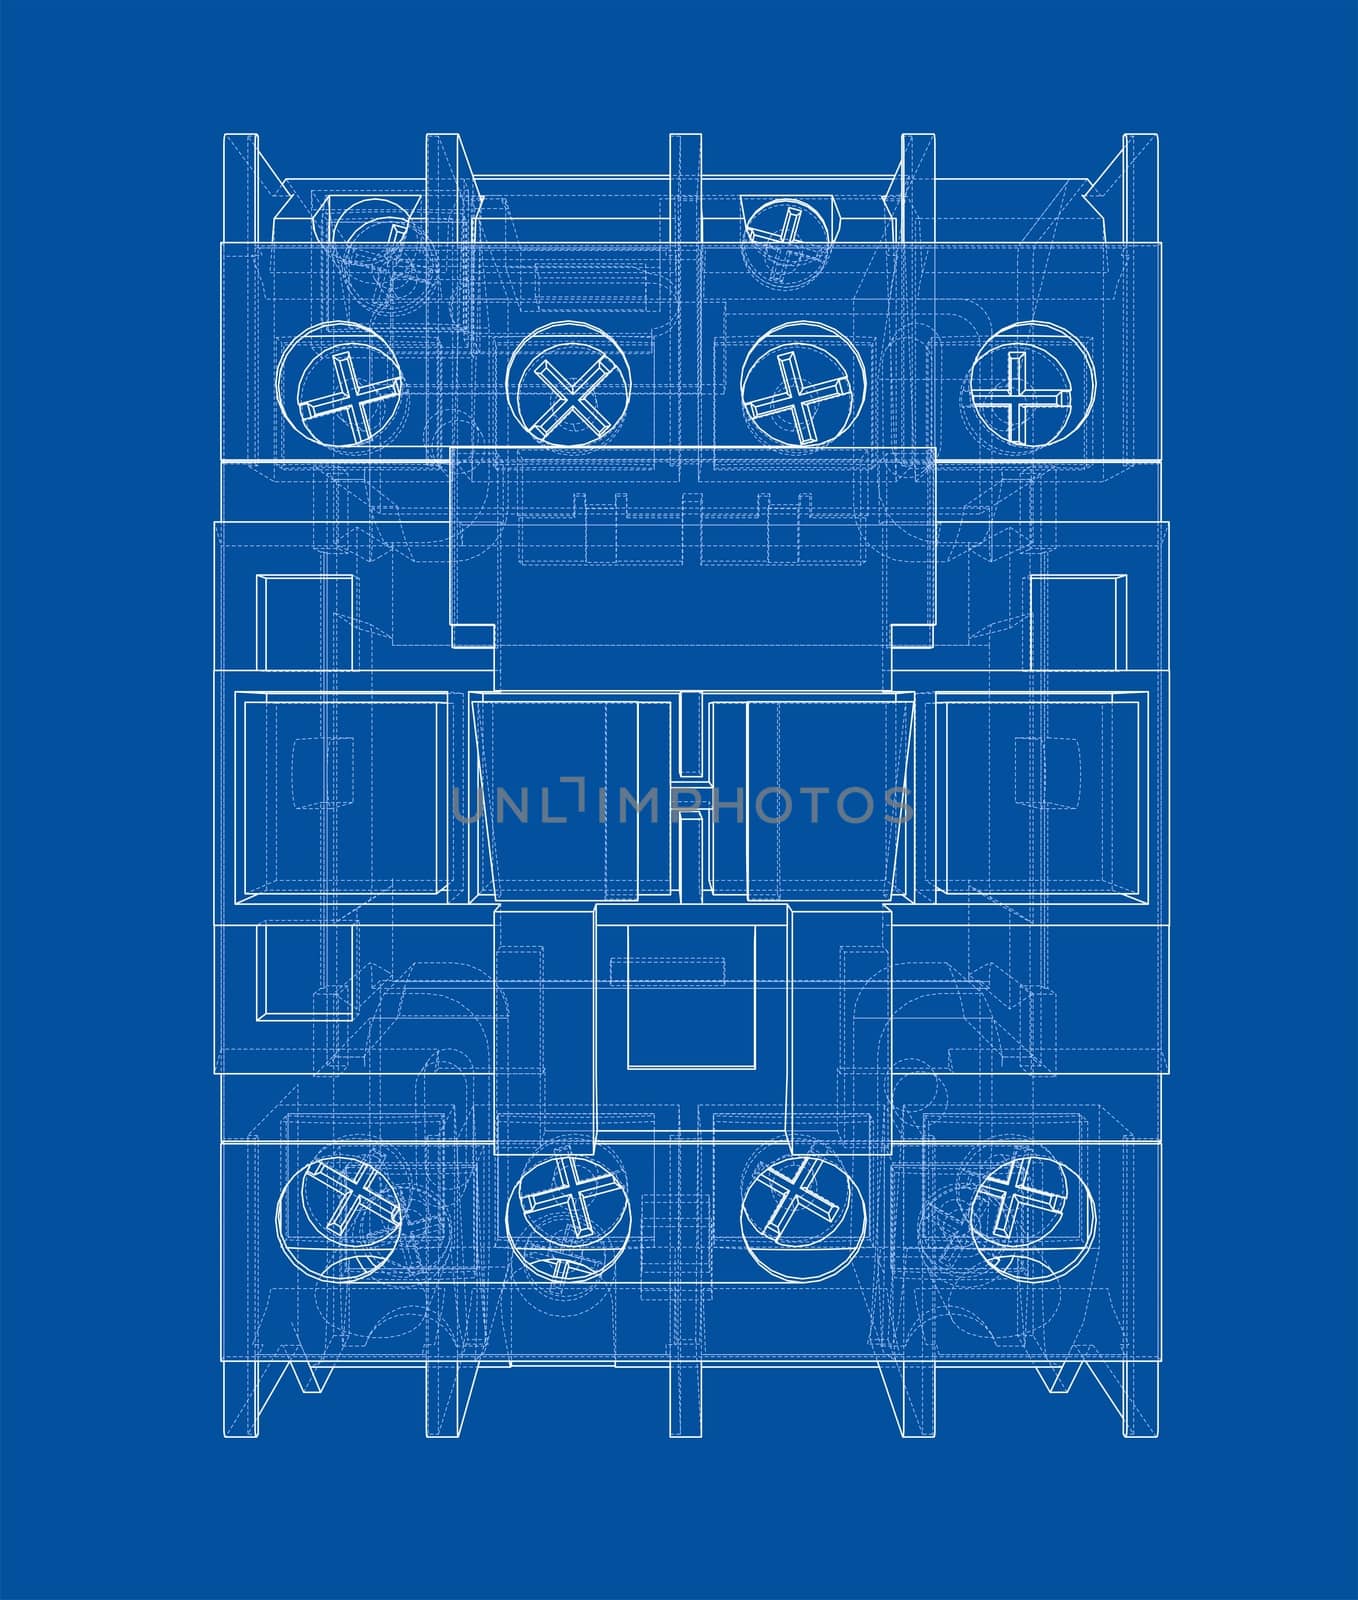 Automatic circuit breaker concept. Wire-frame style. 3d illustration